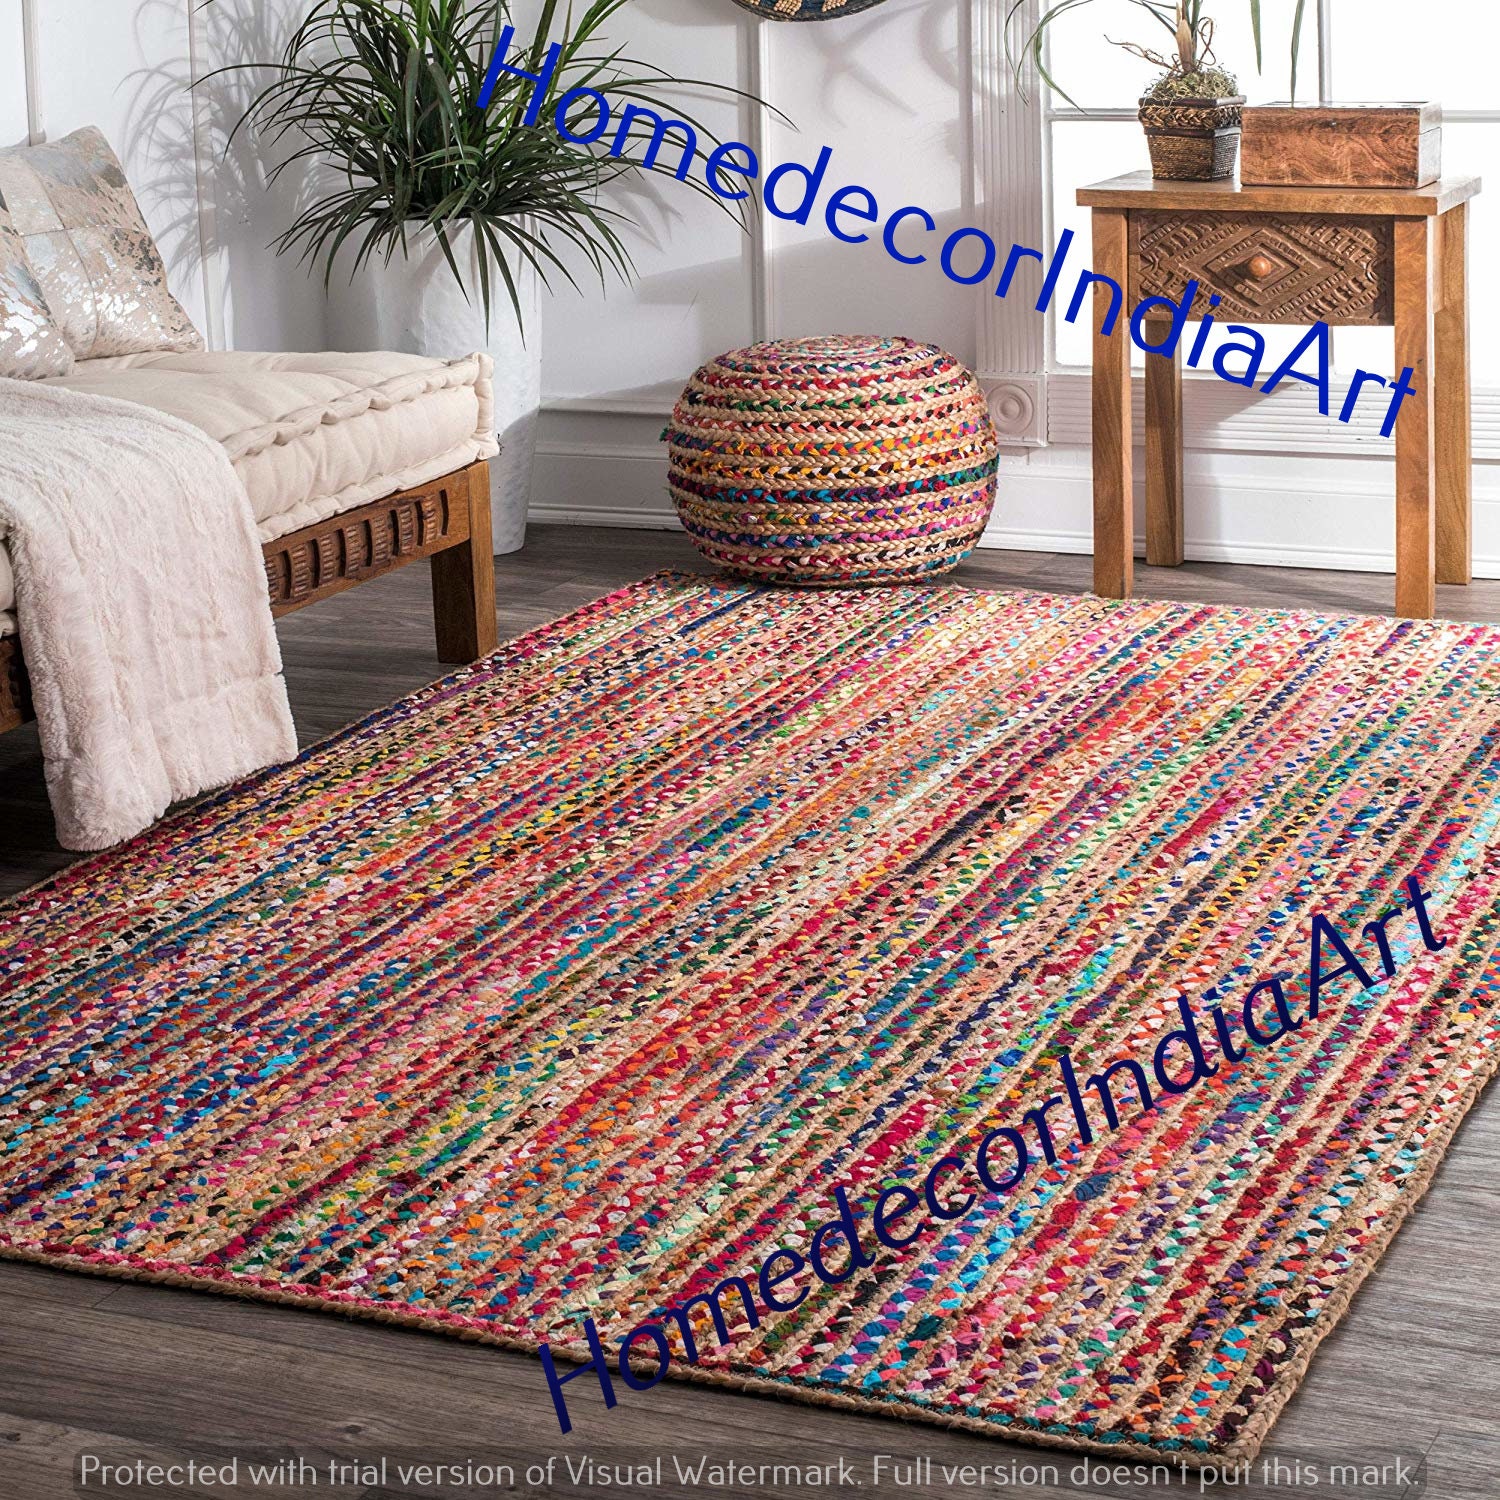 Area Rag Rug Natural Braided Chindi Rectangle Woven Fabric Rug 150X240 CM 